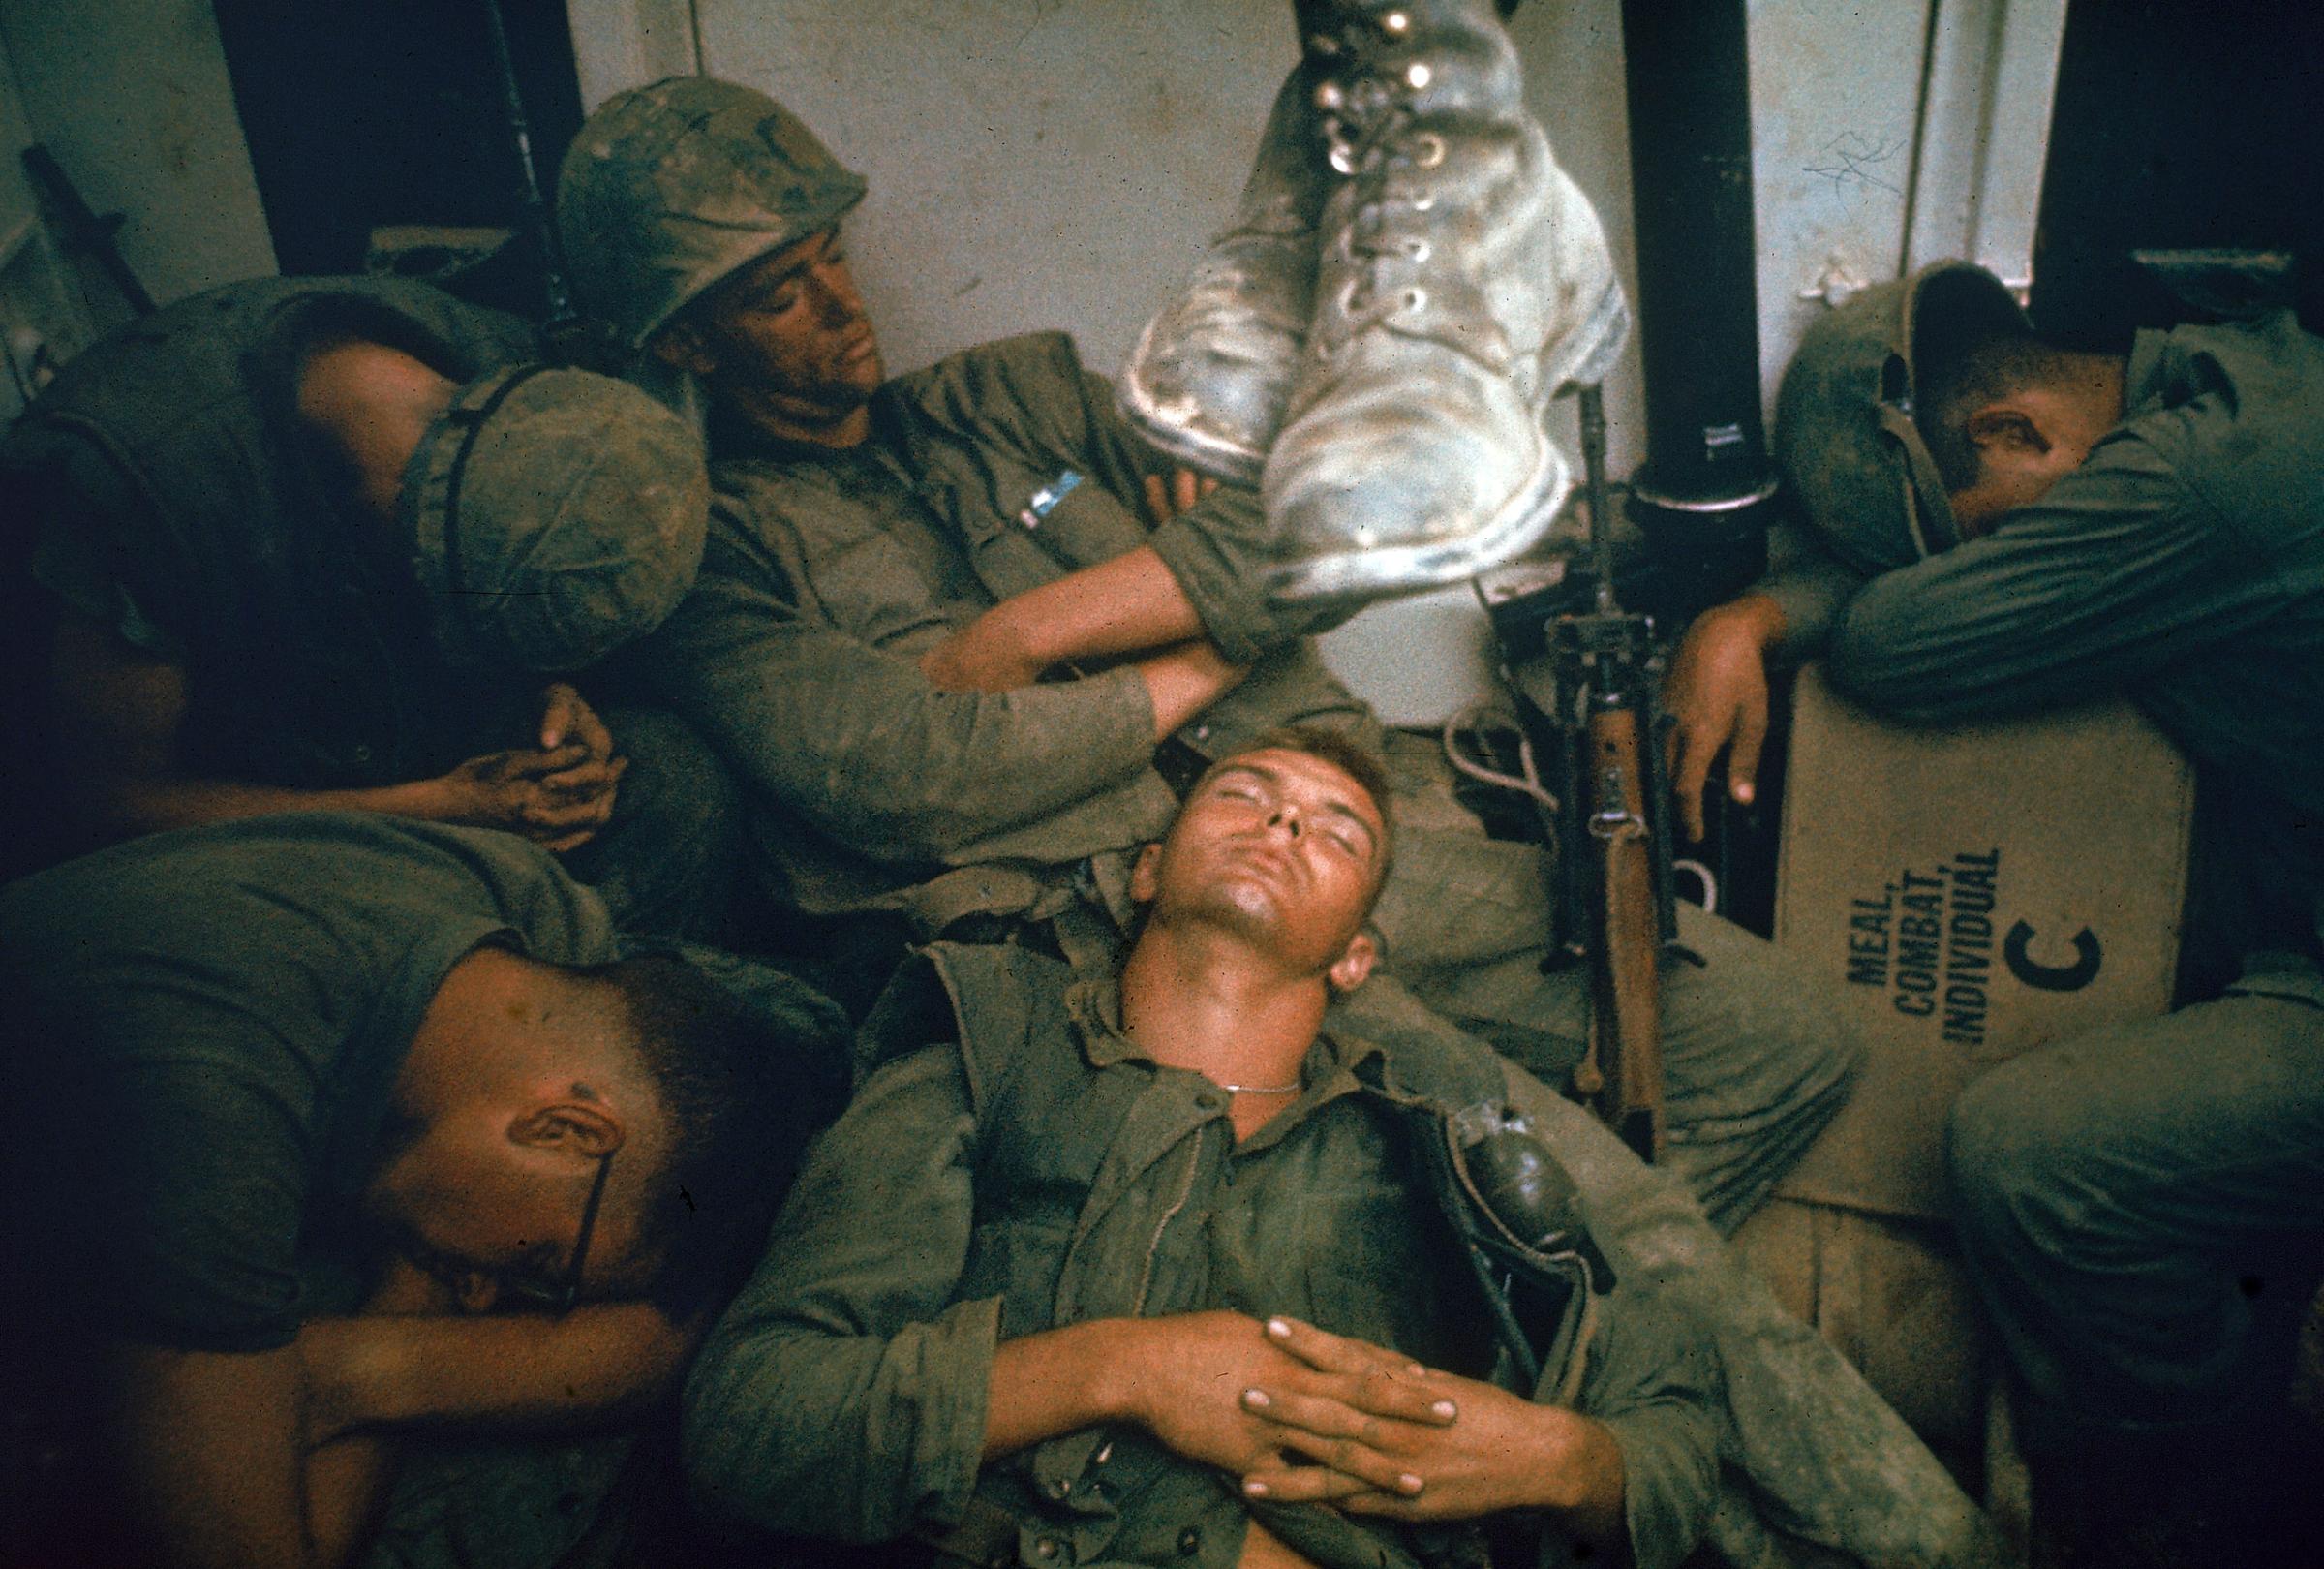 Bone-weary troops flake out in an Amtrak after the beachhead is secured. Marines fought from dawn until dark in temperatures up to 130 degrees on just two canteens of water per man.